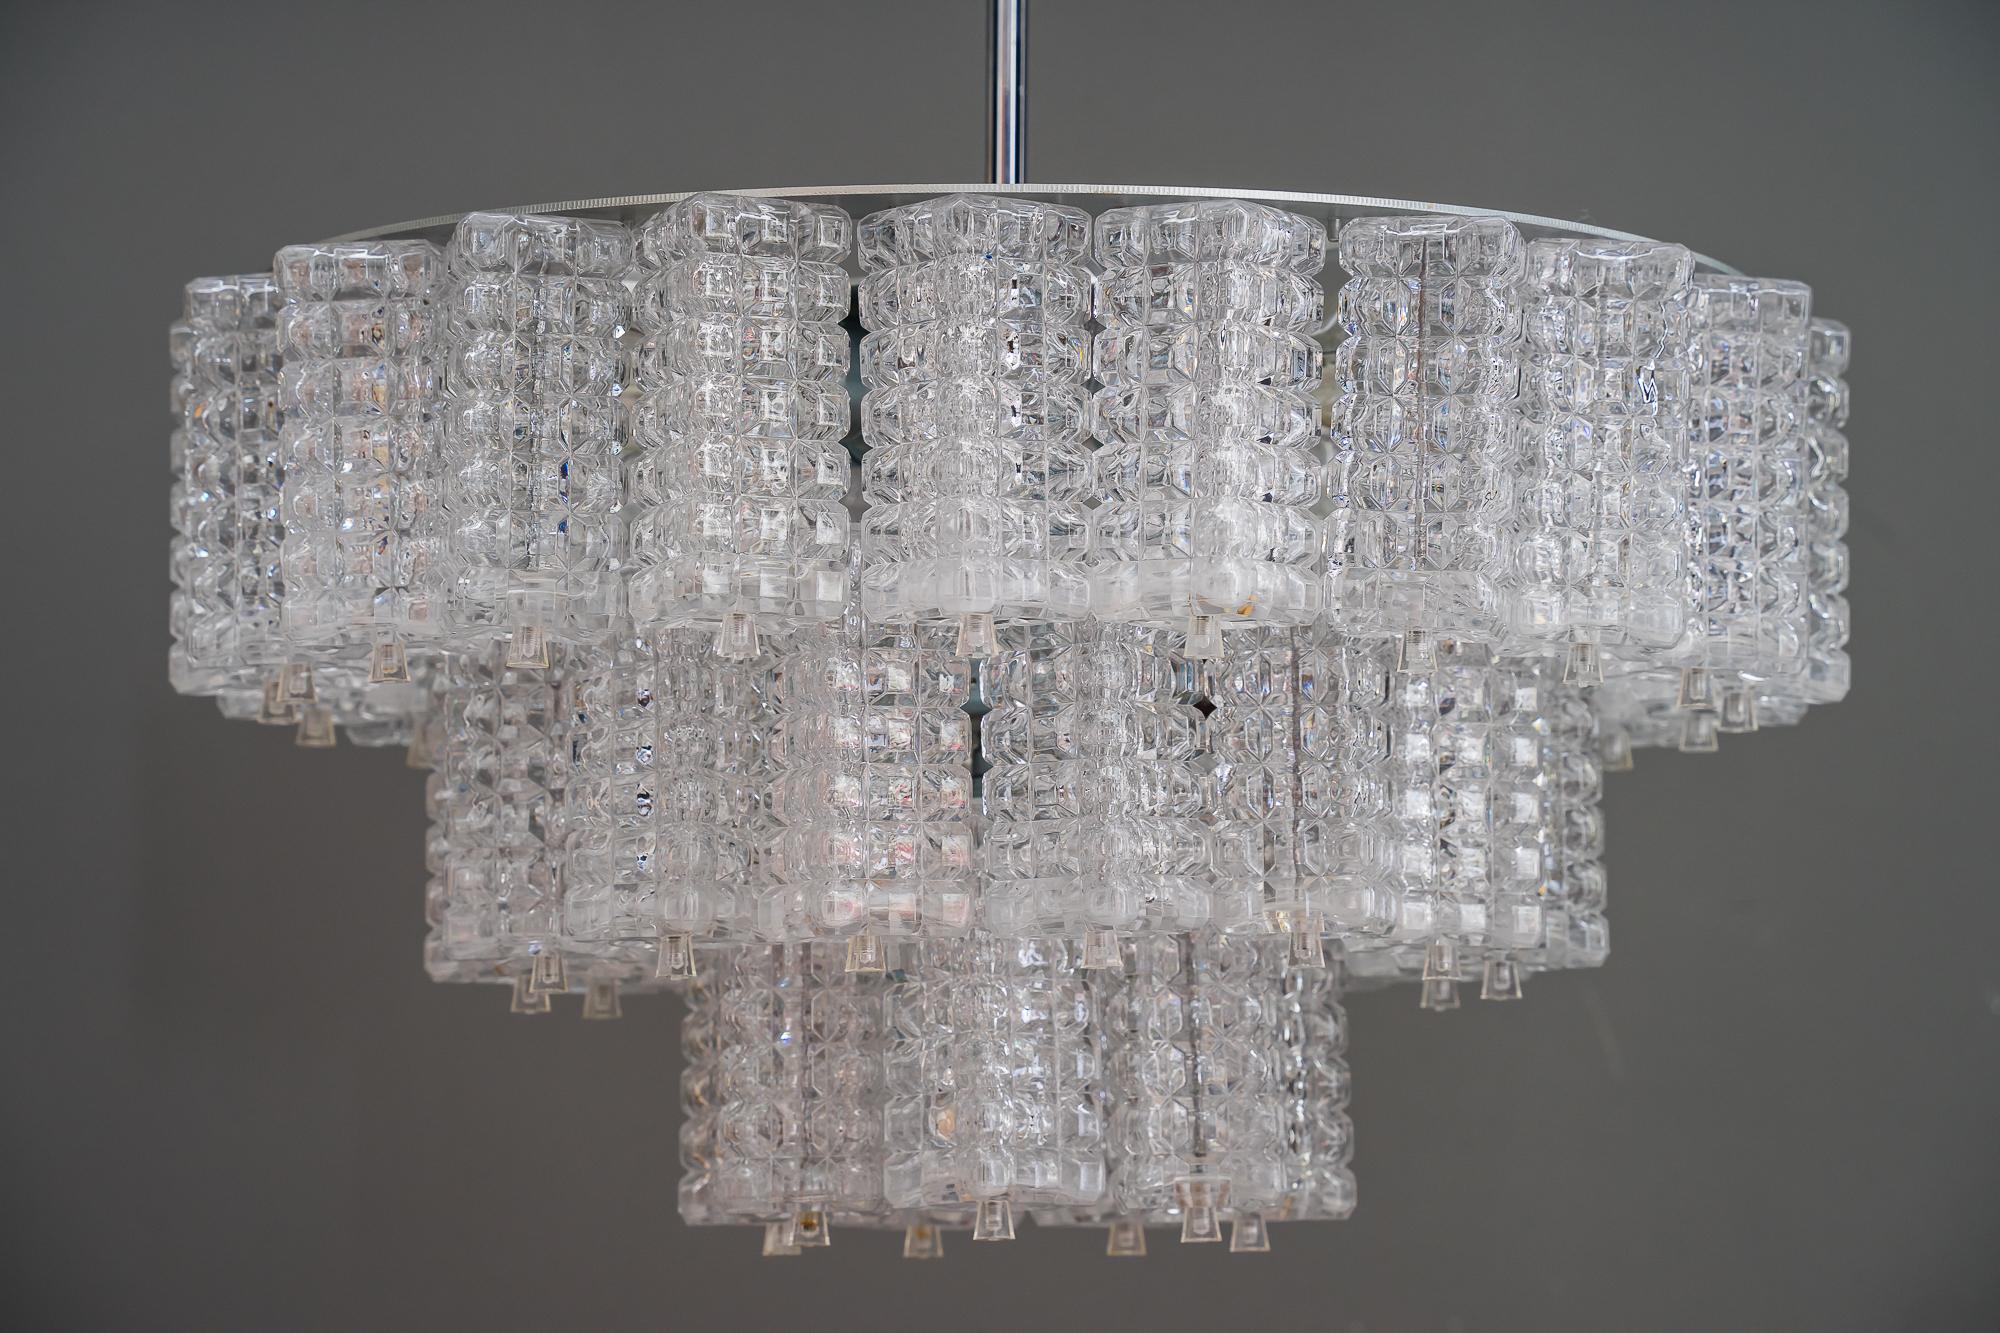 Austrolux chandeliers, Austrian, 1960s
(This can be shorter or longer on request).
Original condition.